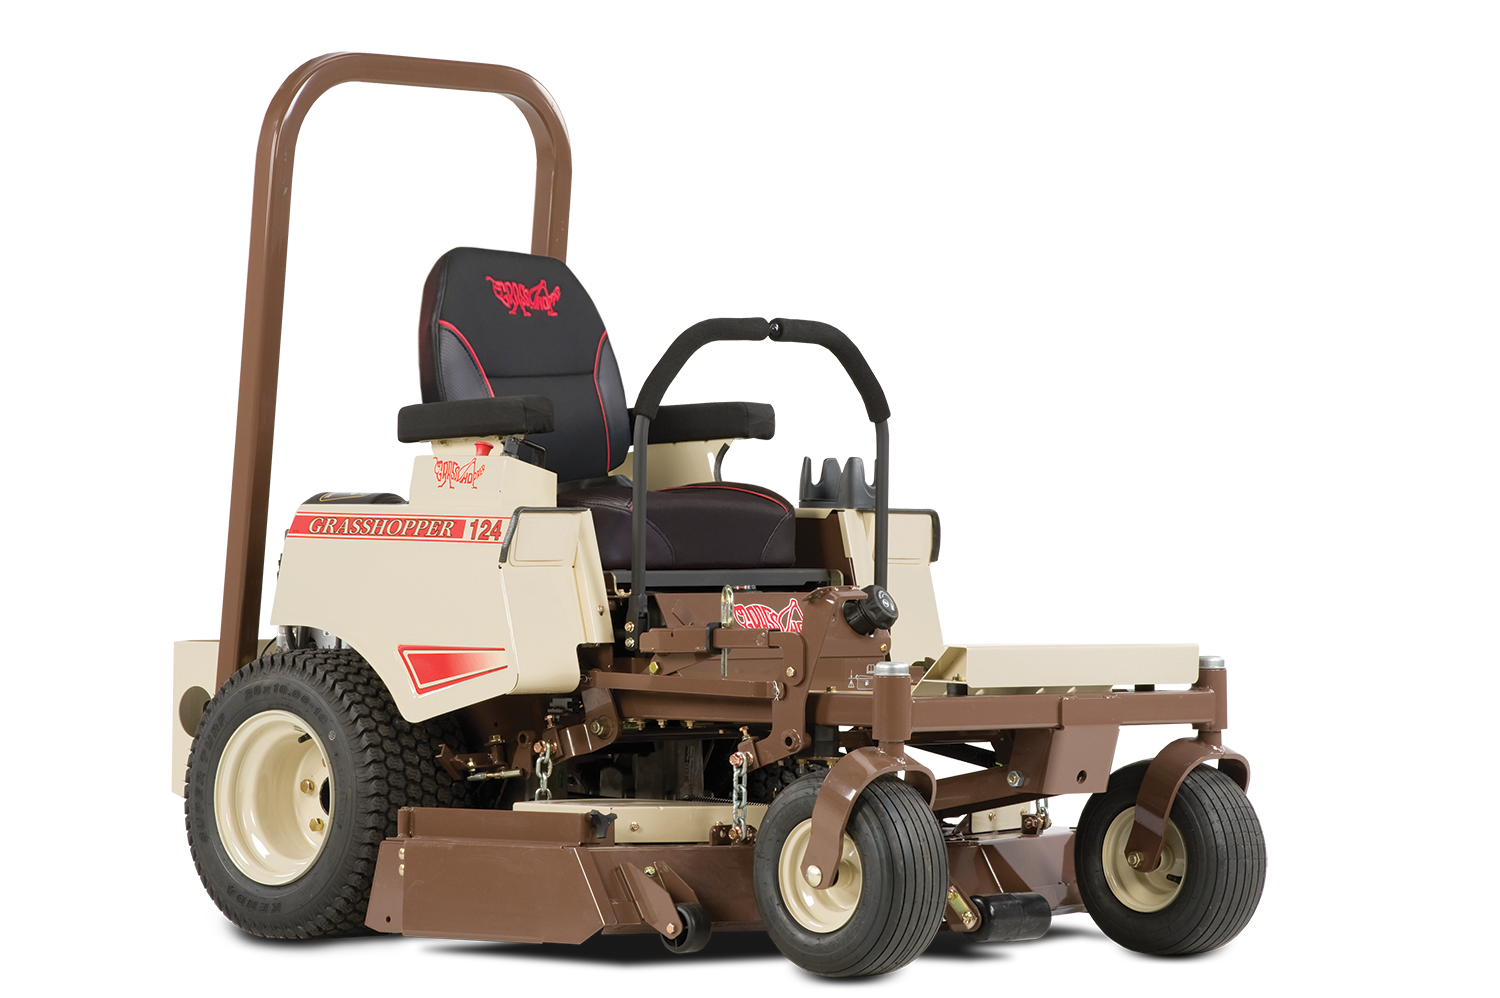 Are Grasshopper Mowers Worth the Price?